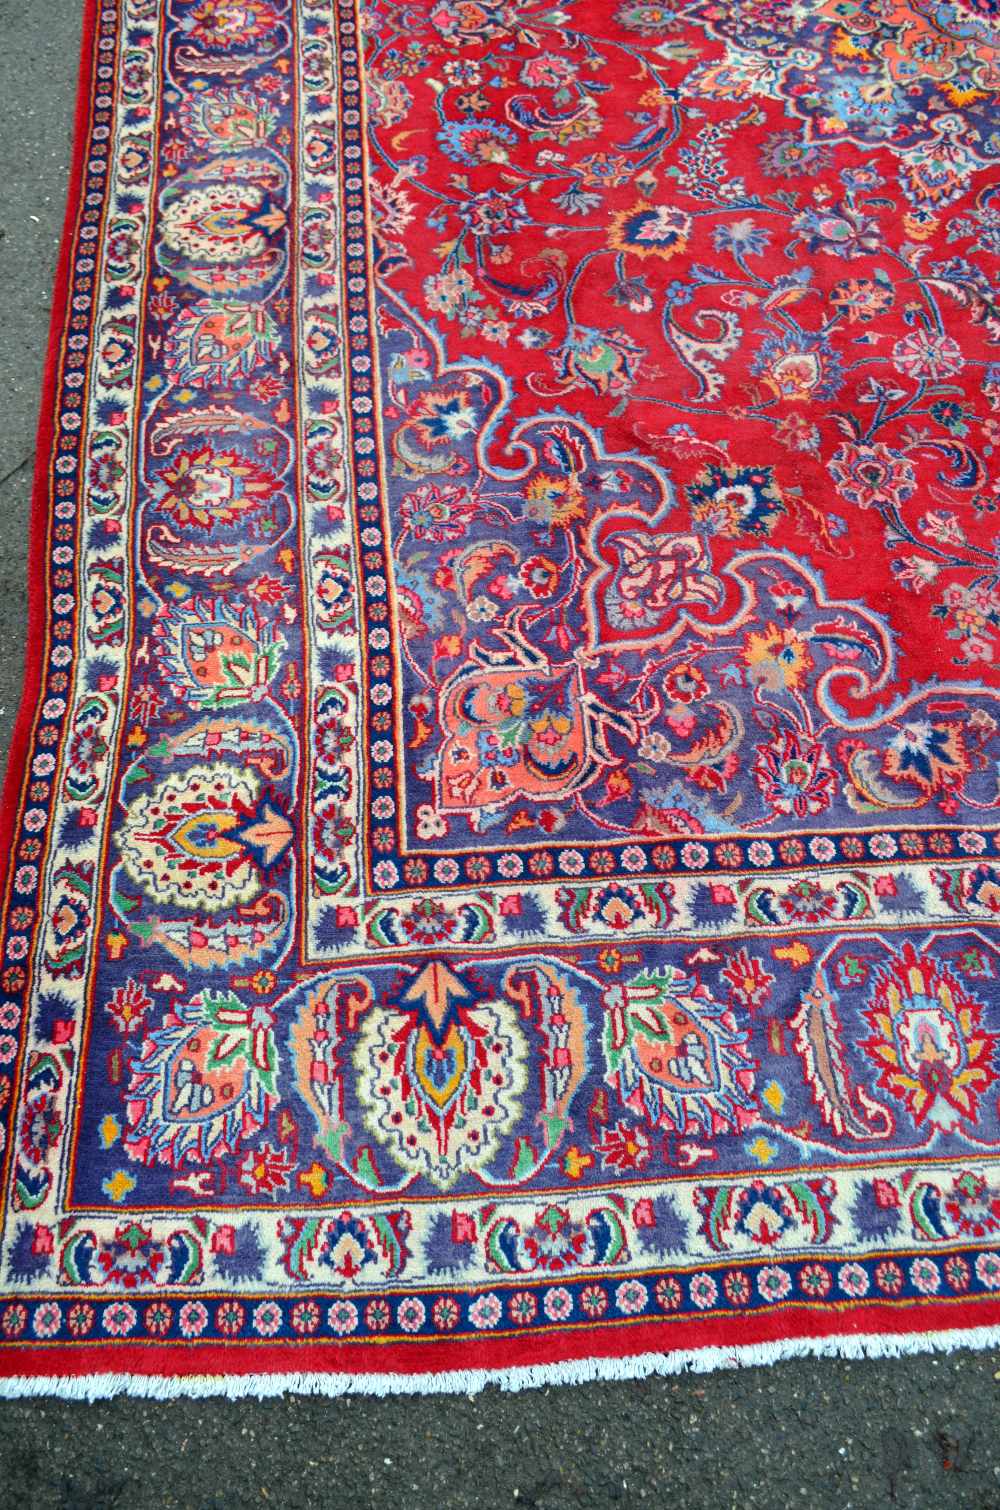 Hand woven persian Tabriz carpet, 100% wool, with multi-coloured design - Image 4 of 7